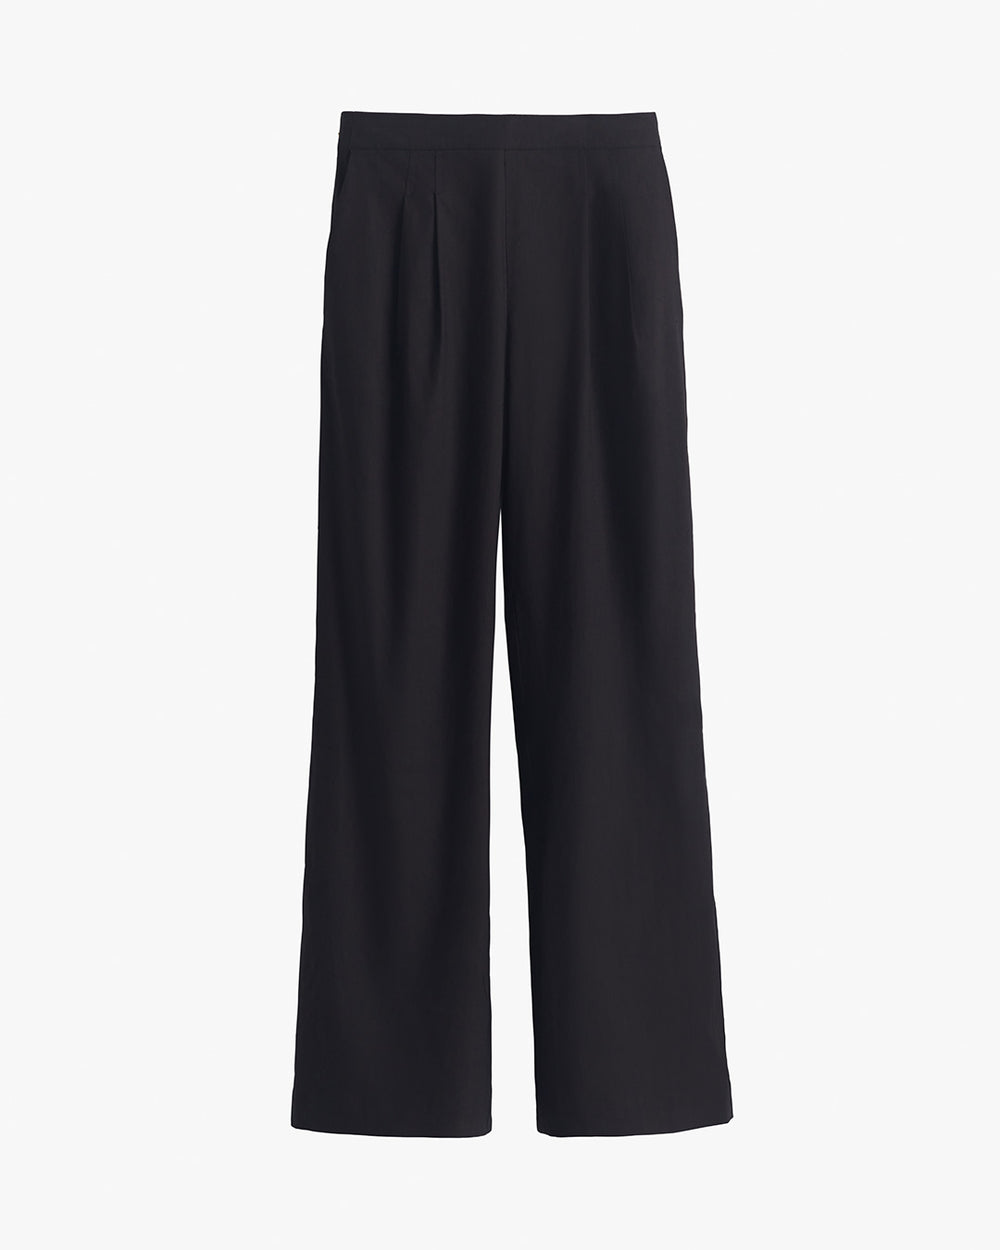 Pair of wide leg pants hanging against a plain background